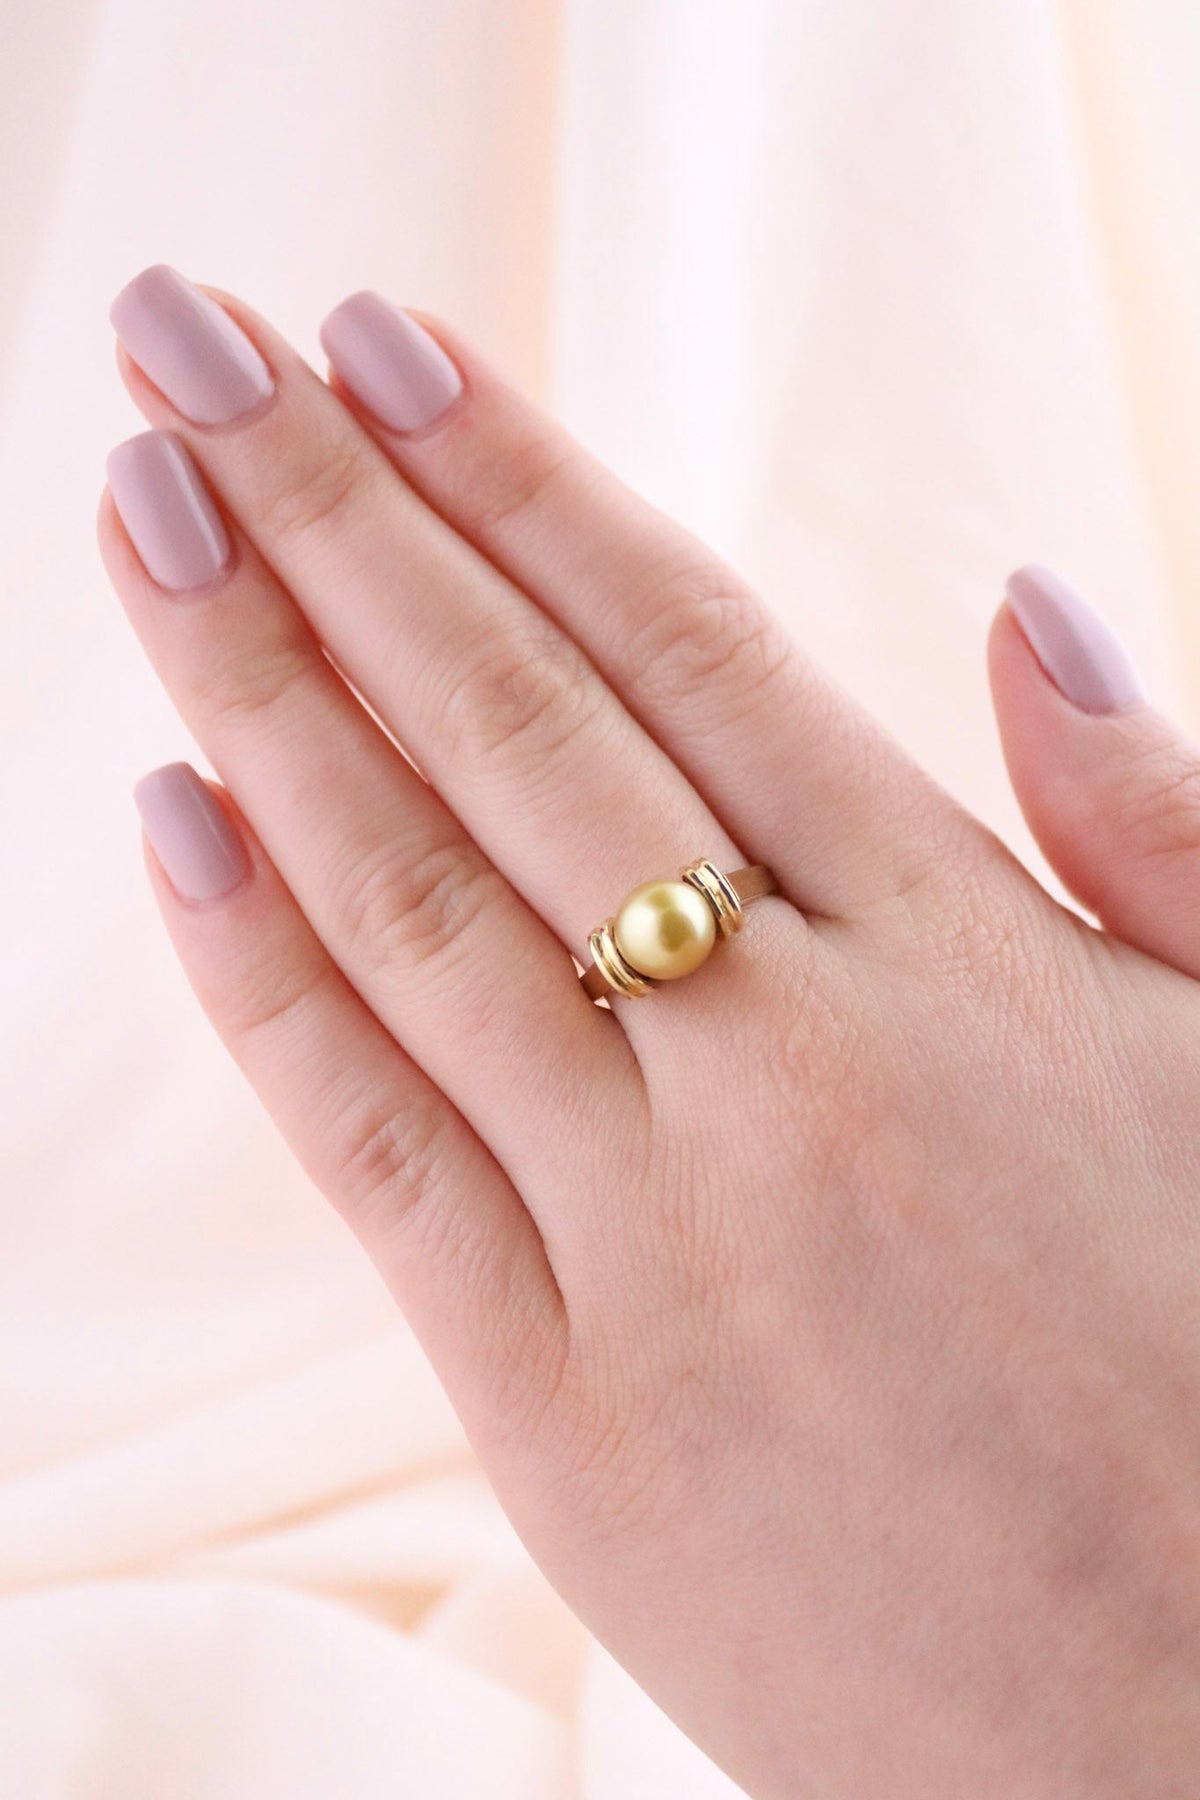 18K Gold South Sea Pearl Ring with Squared Band - Kingdom Jewelry